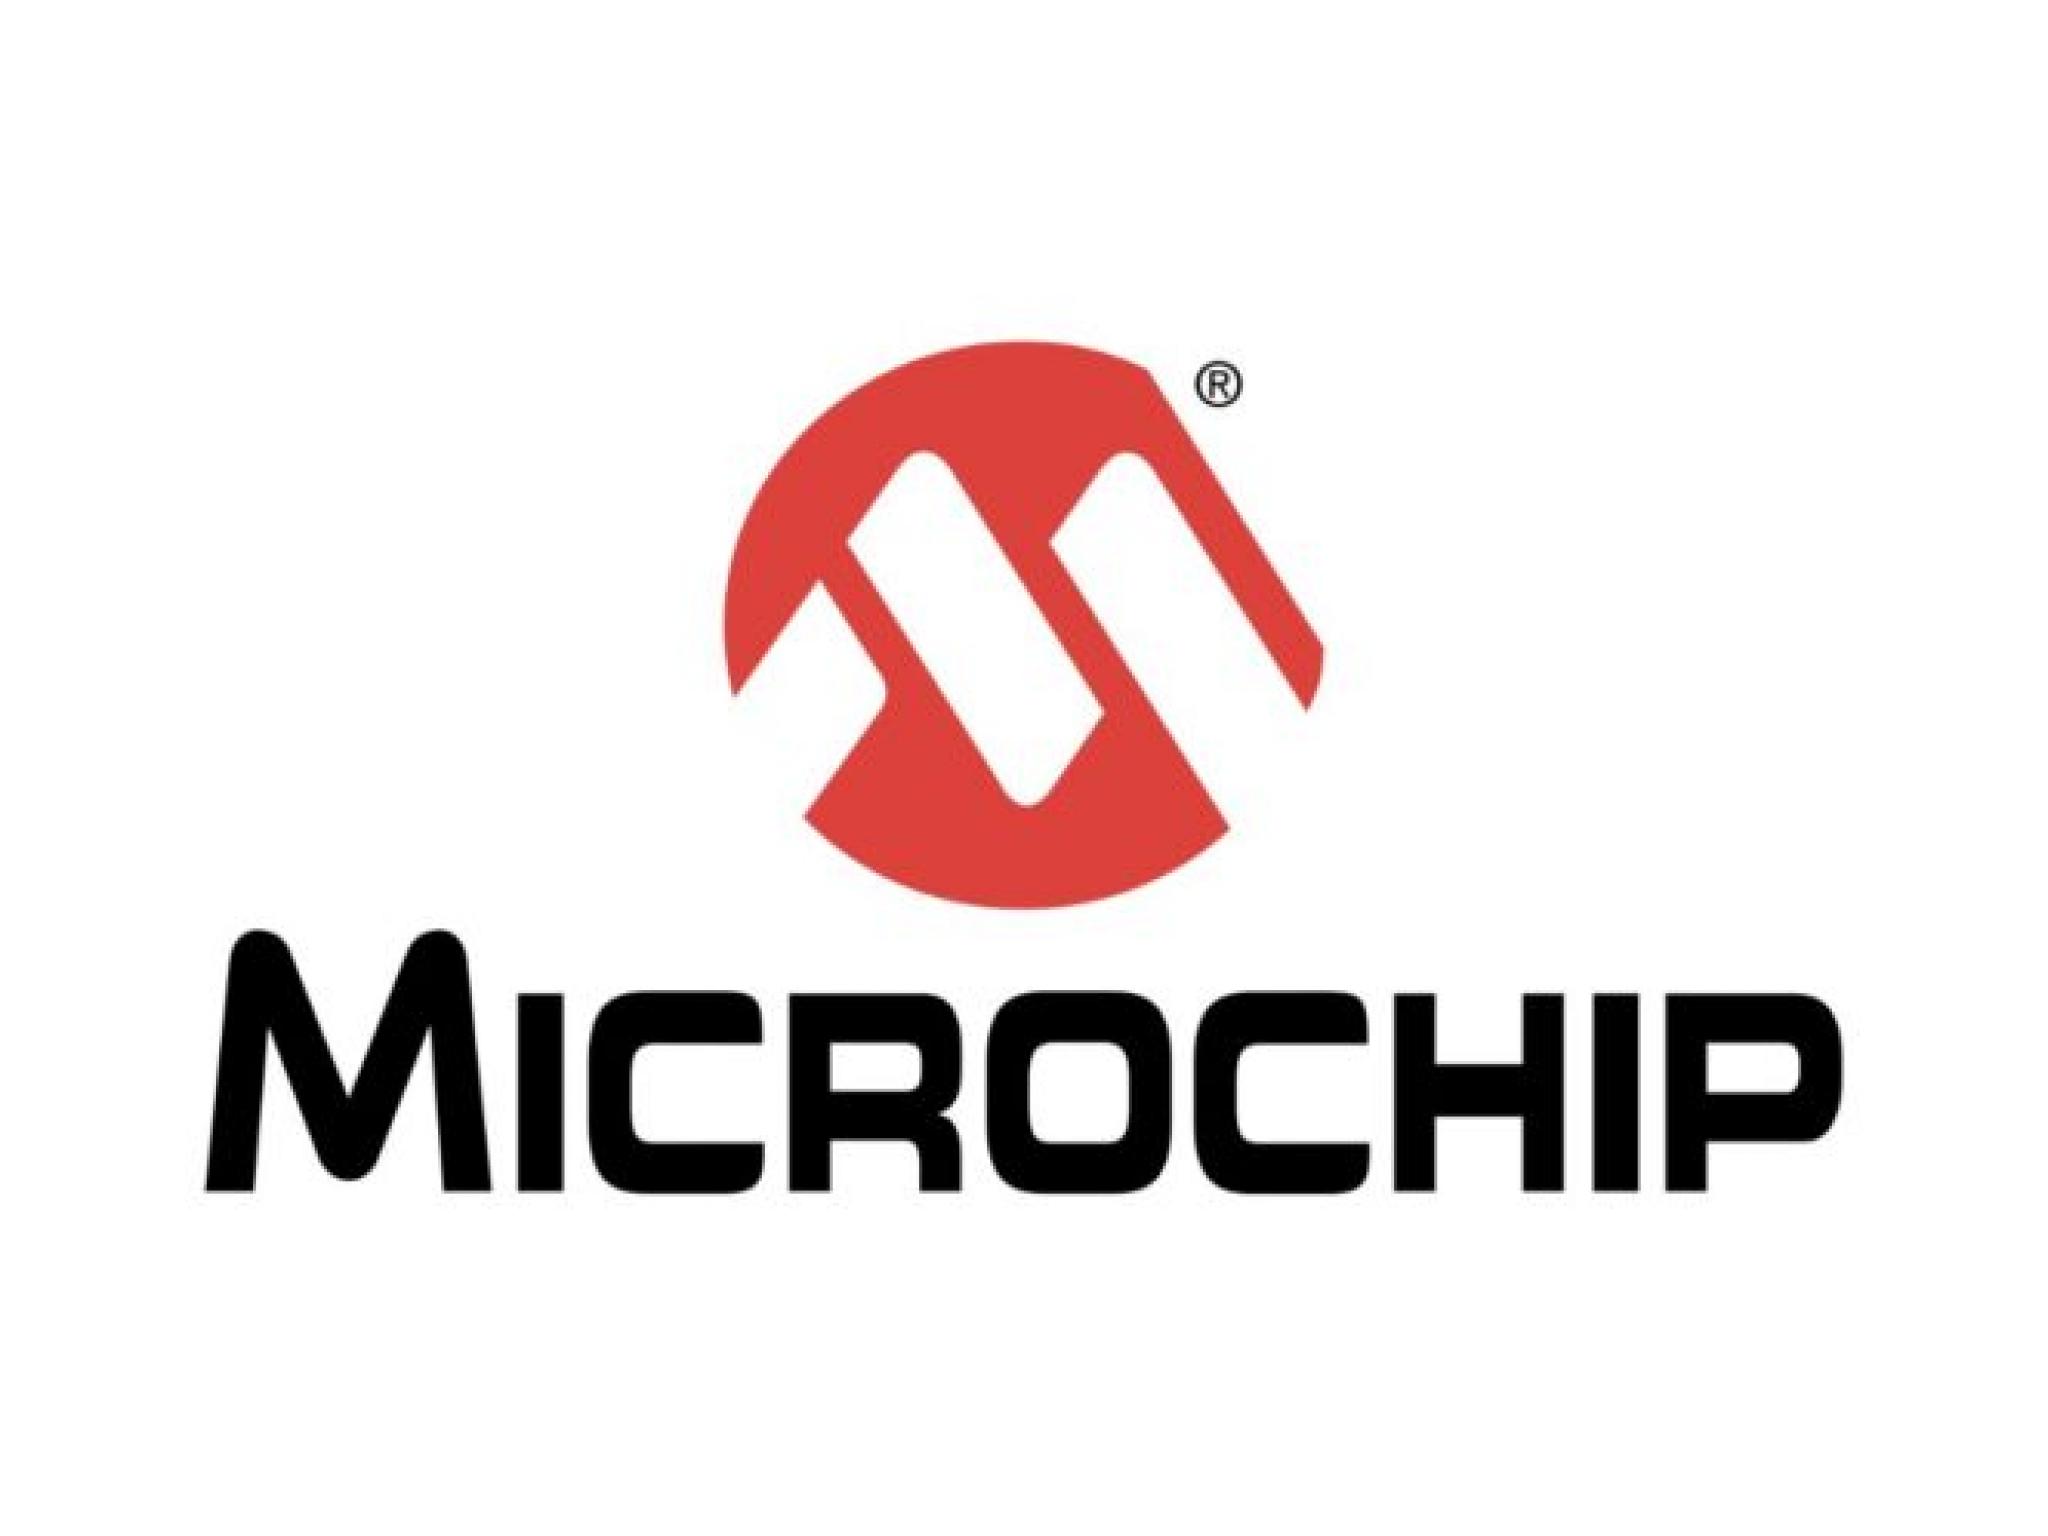  whats-going-on-with-microchip-technology-stock-friday 